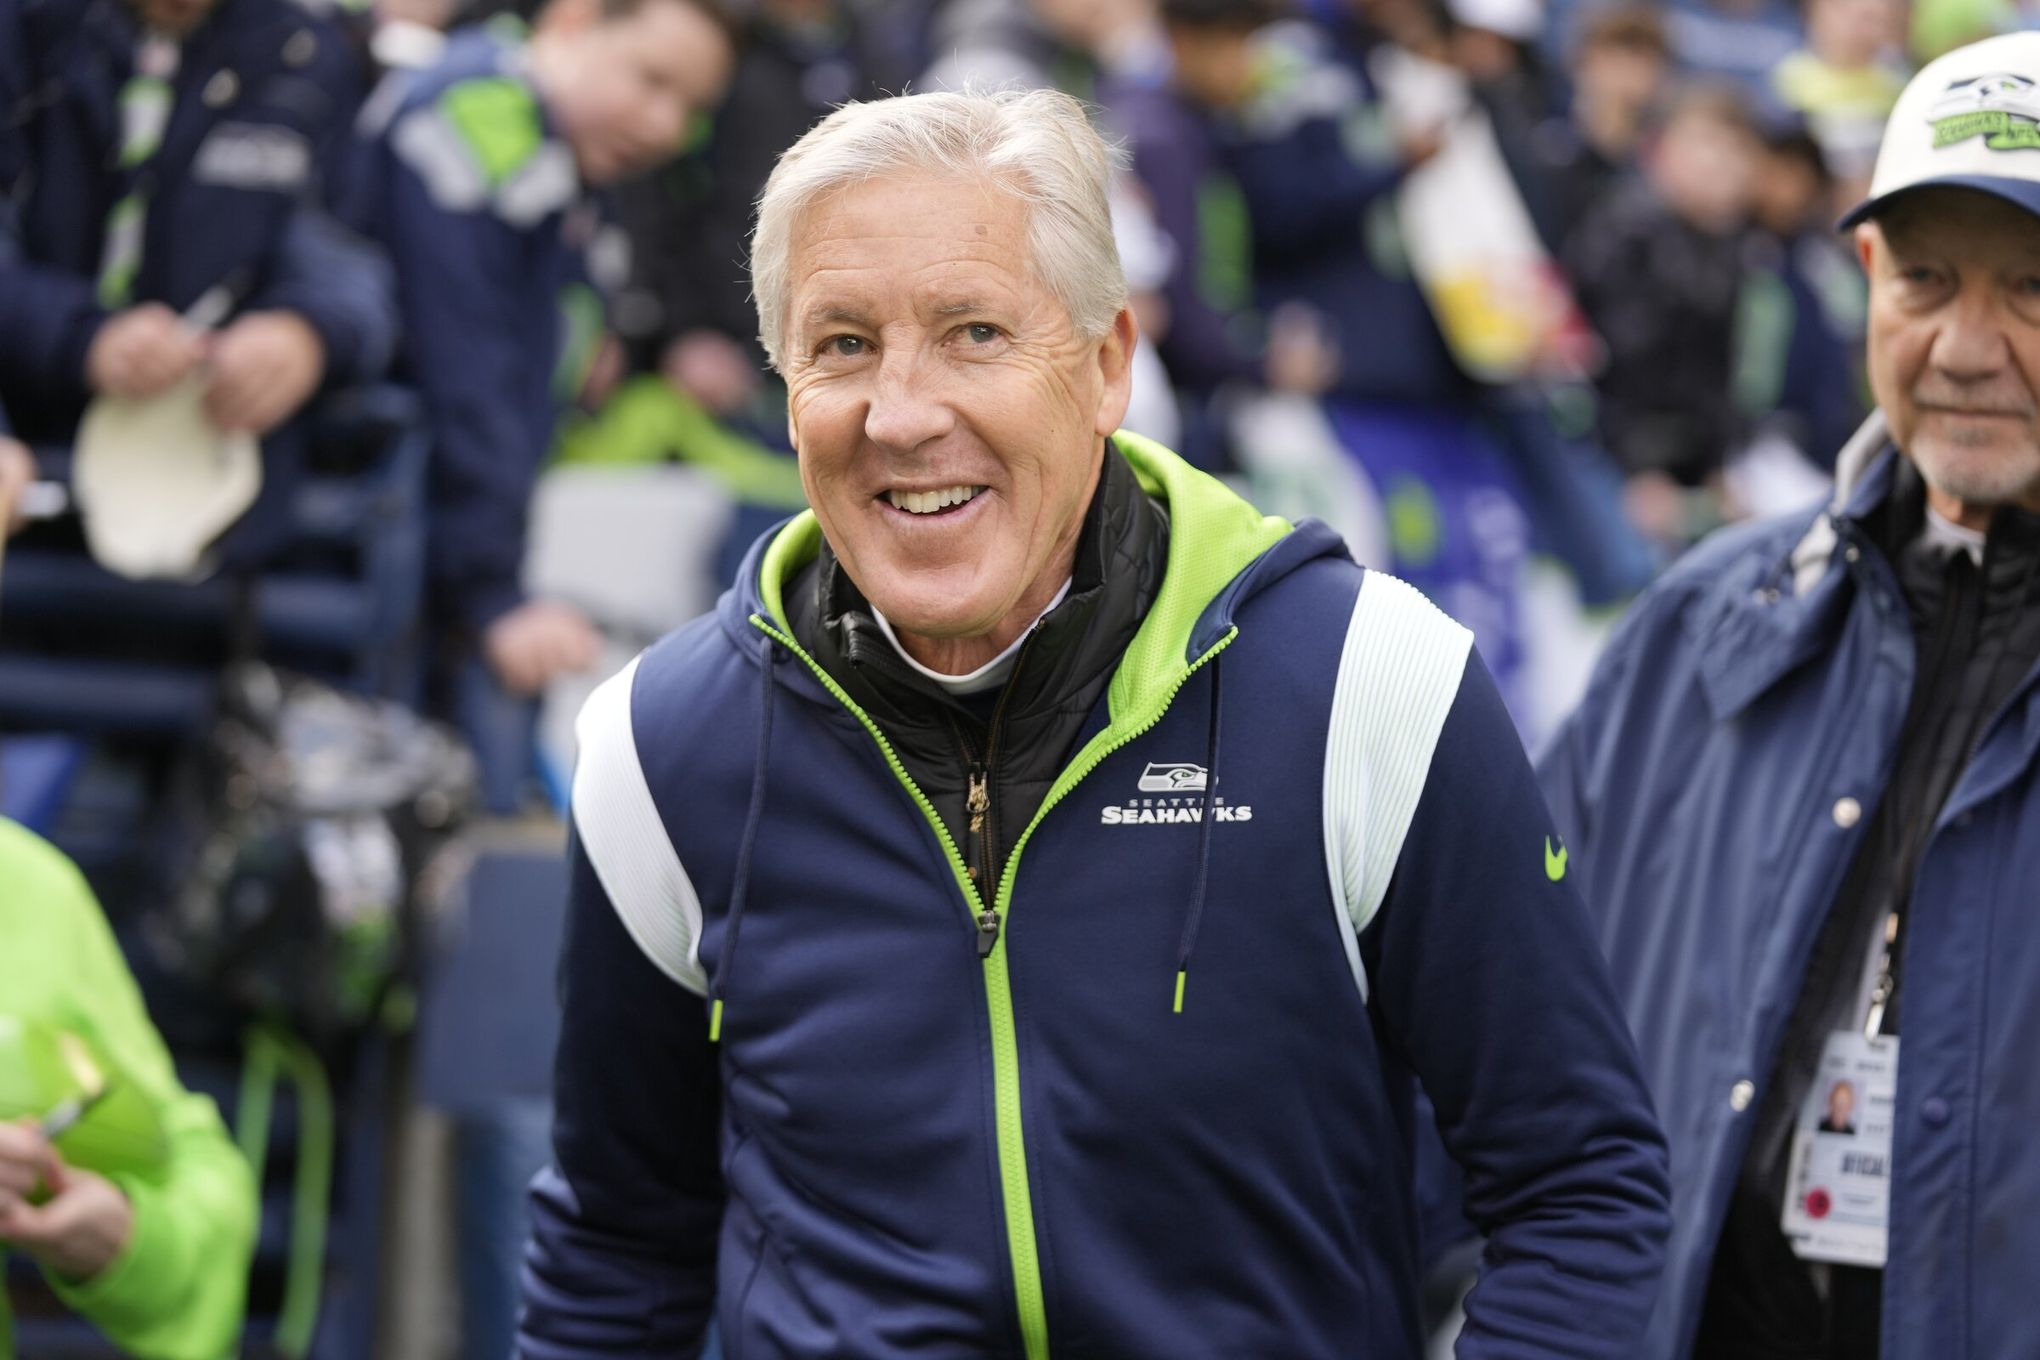 2022 Seattle Seahawks Schedule: Complete schedule, dates, times